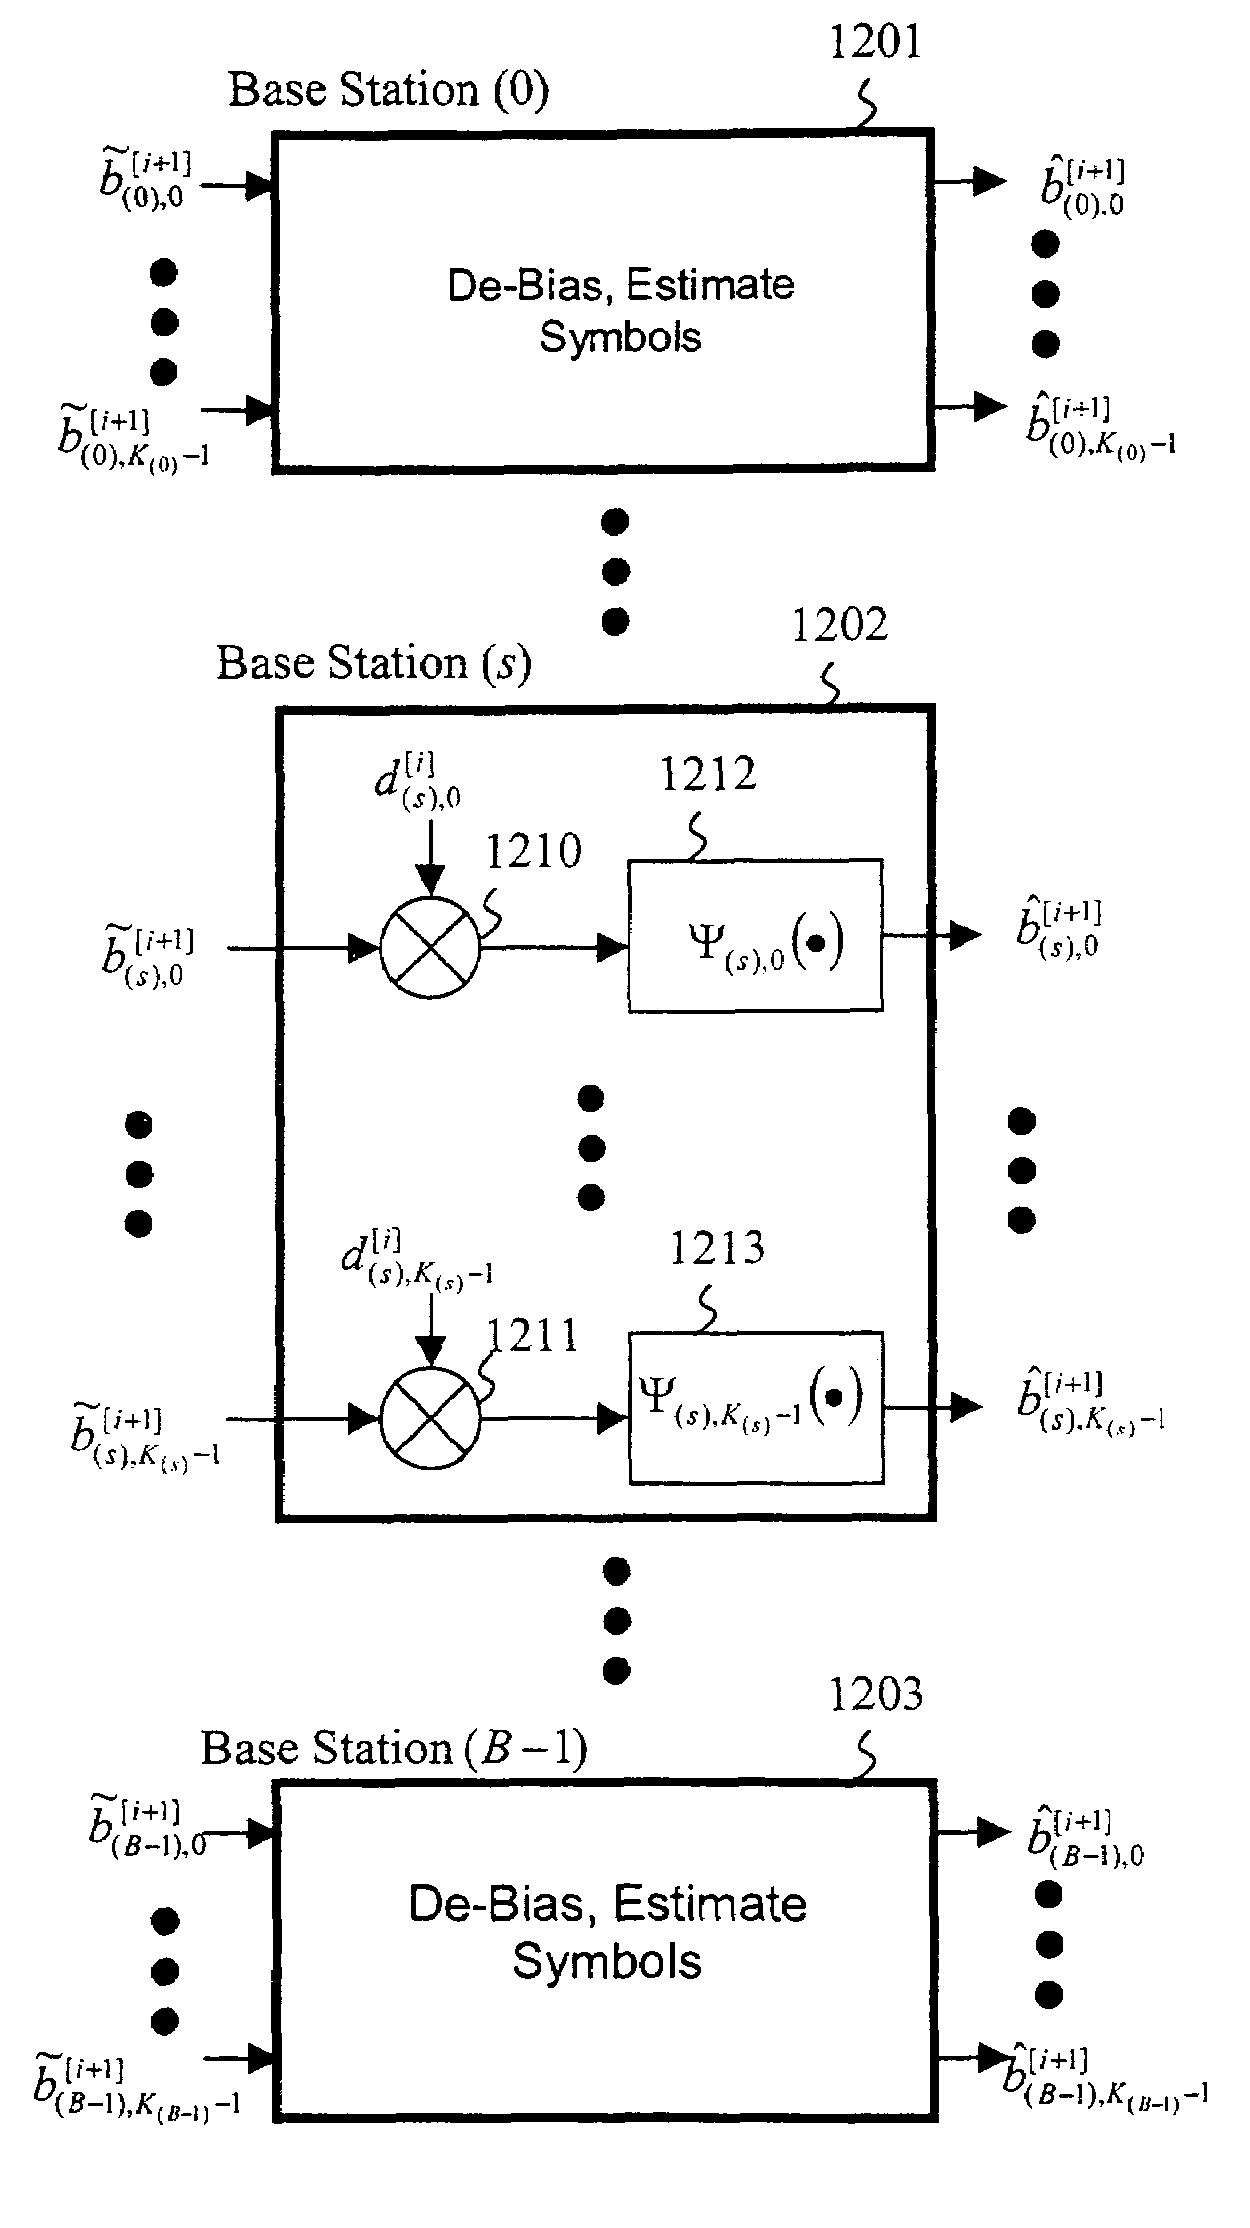 Iterative interference cancellation using mixed feedback weights and stabilizing step sizes